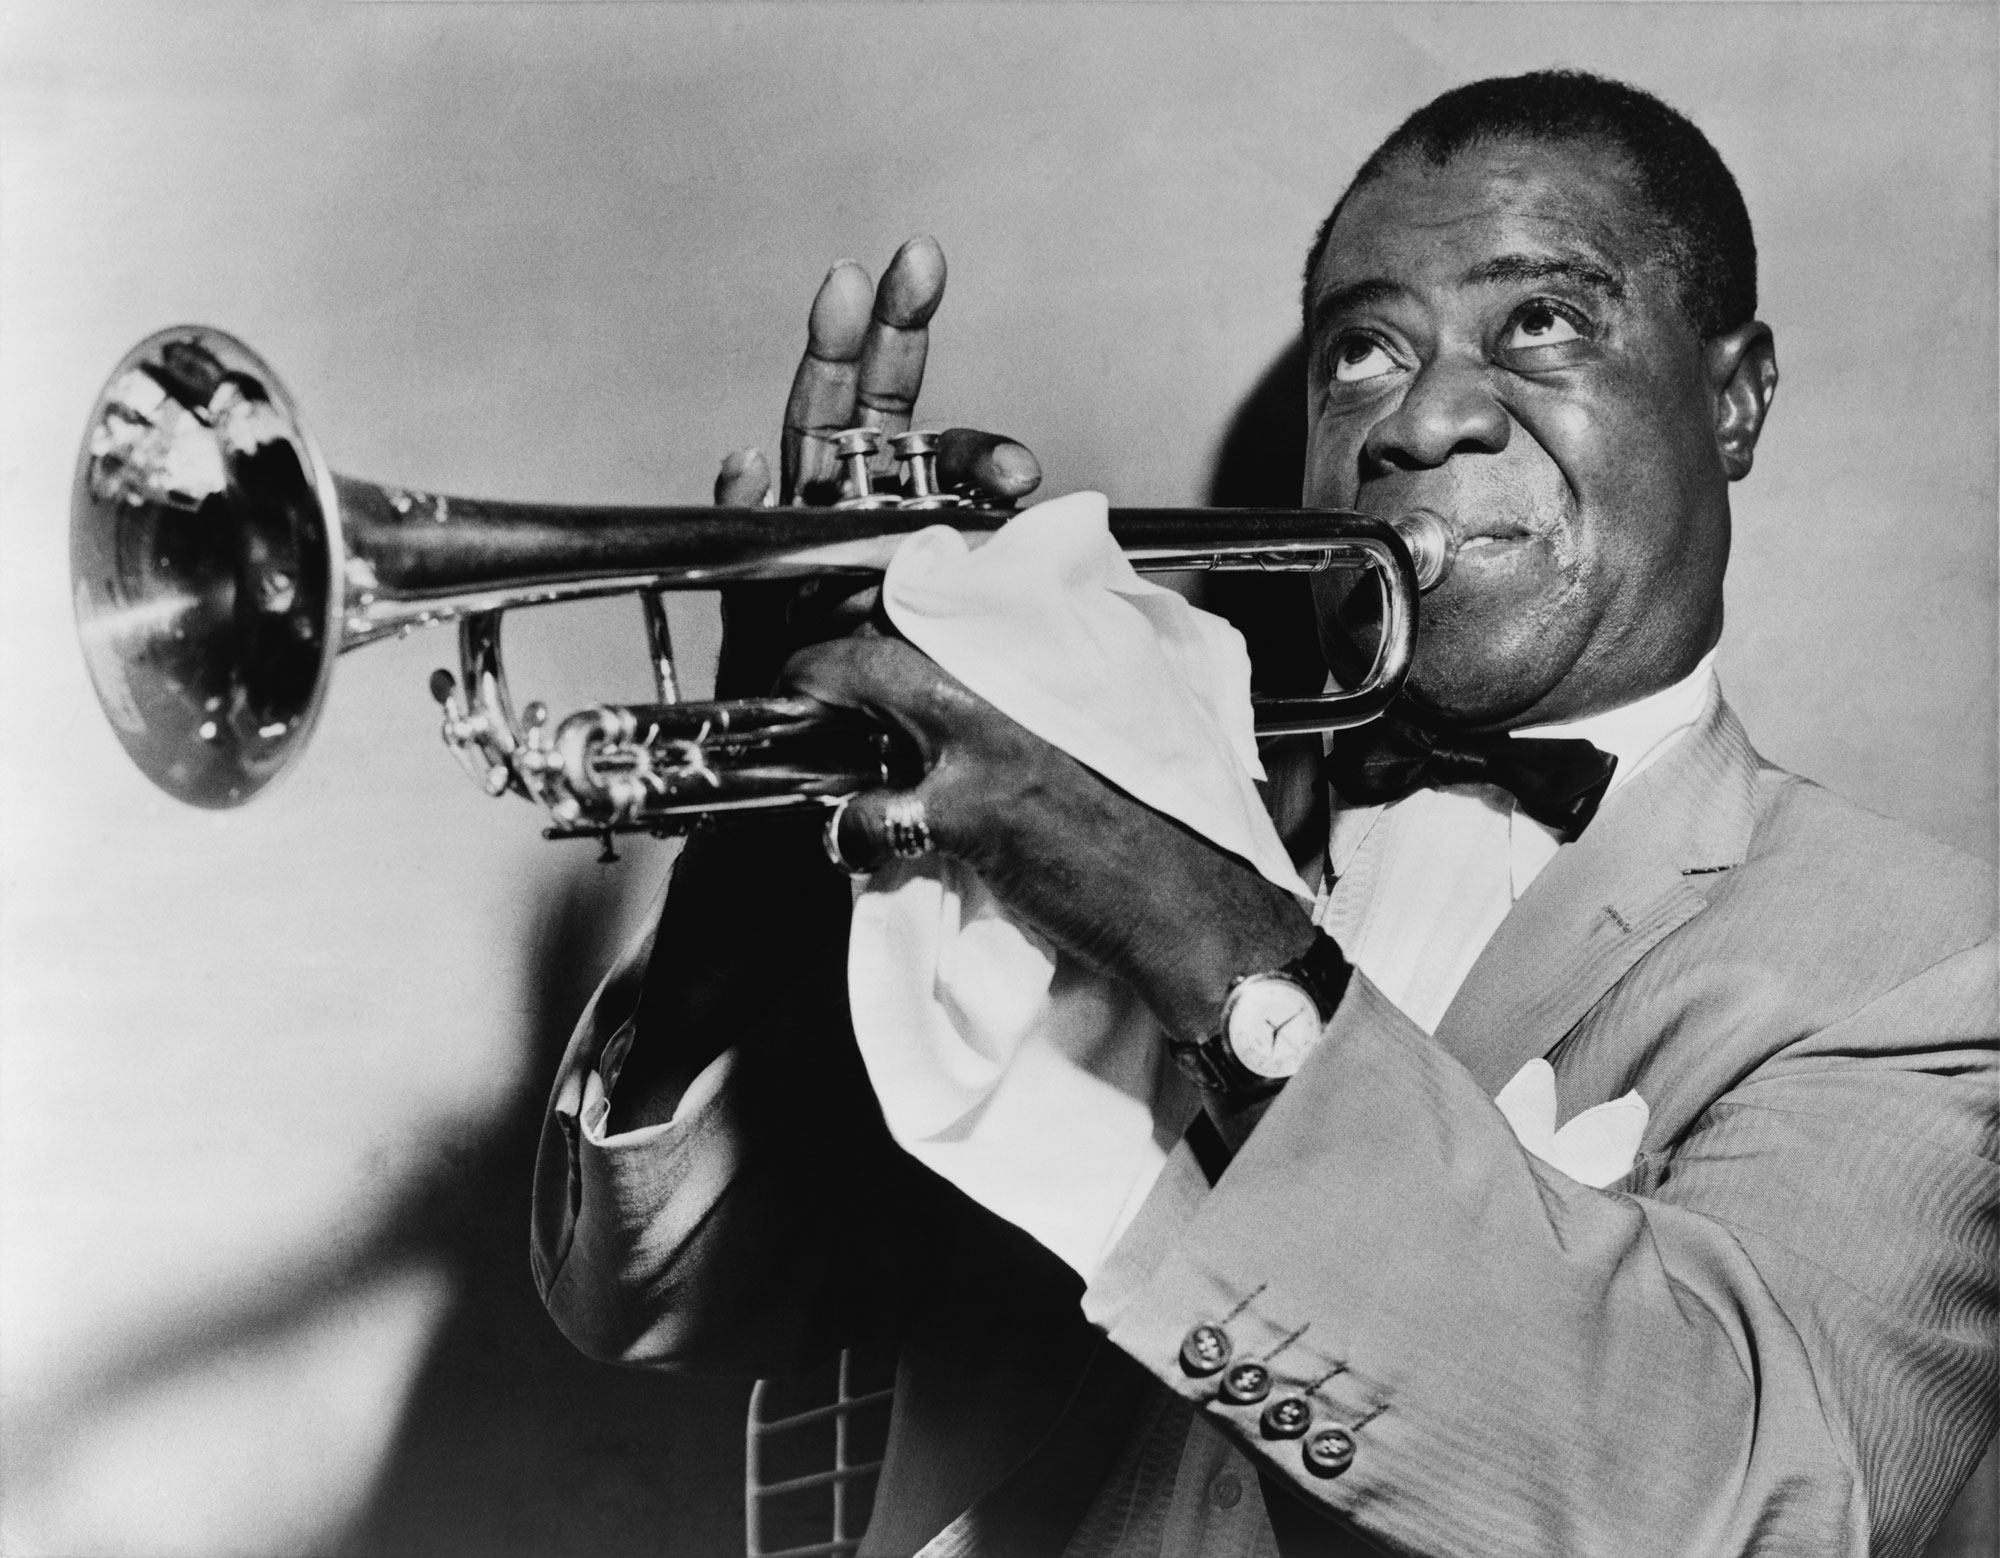 Louis Armstrong playing the trumpet in a black and white photo